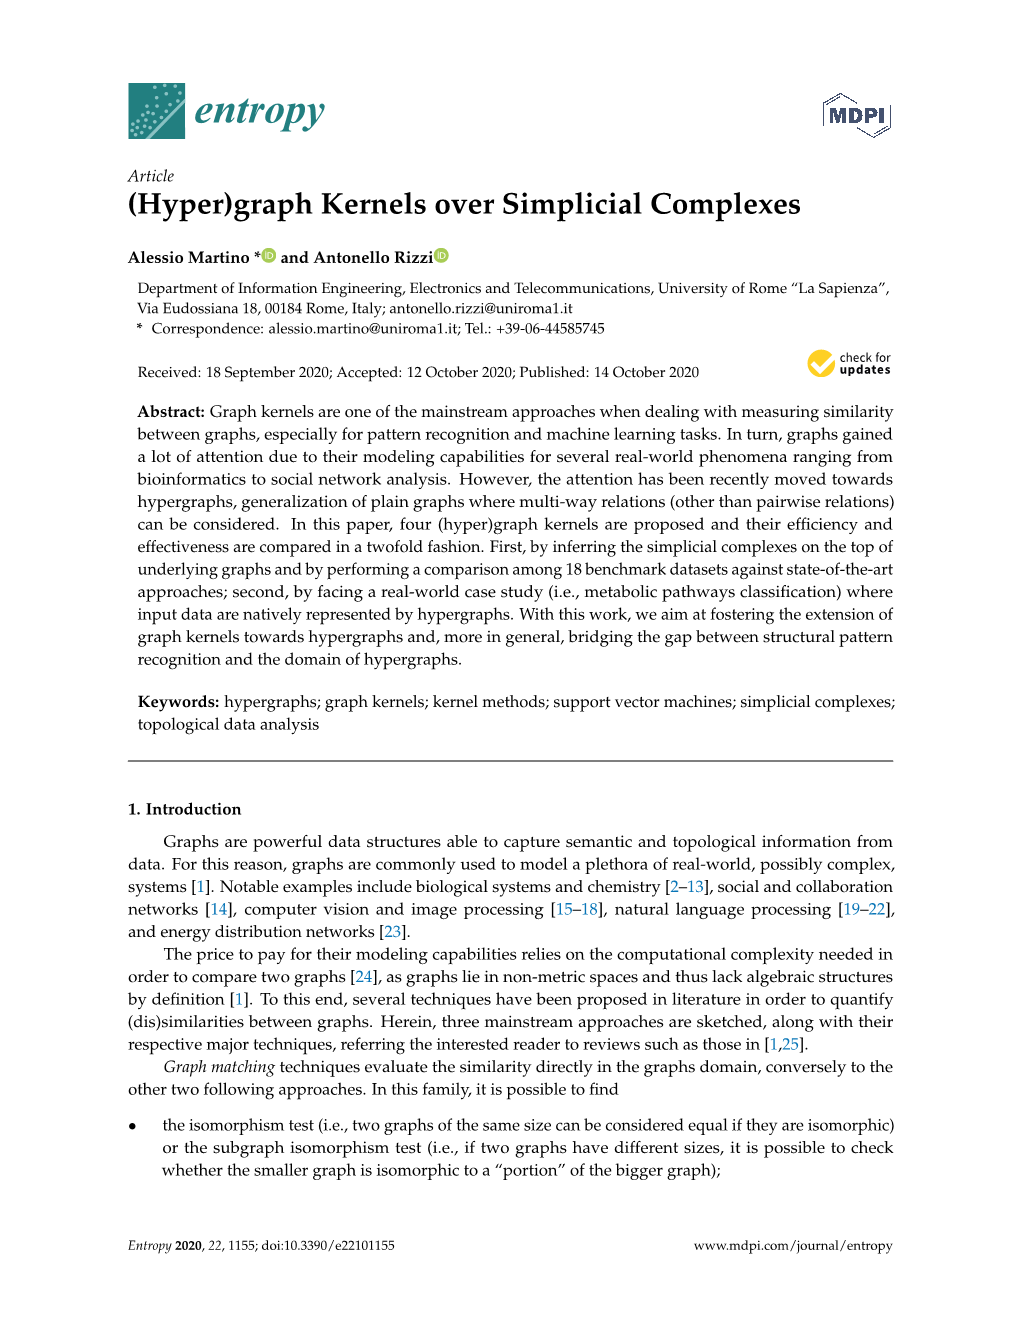 Graph Kernels Over Simplicial Complexes